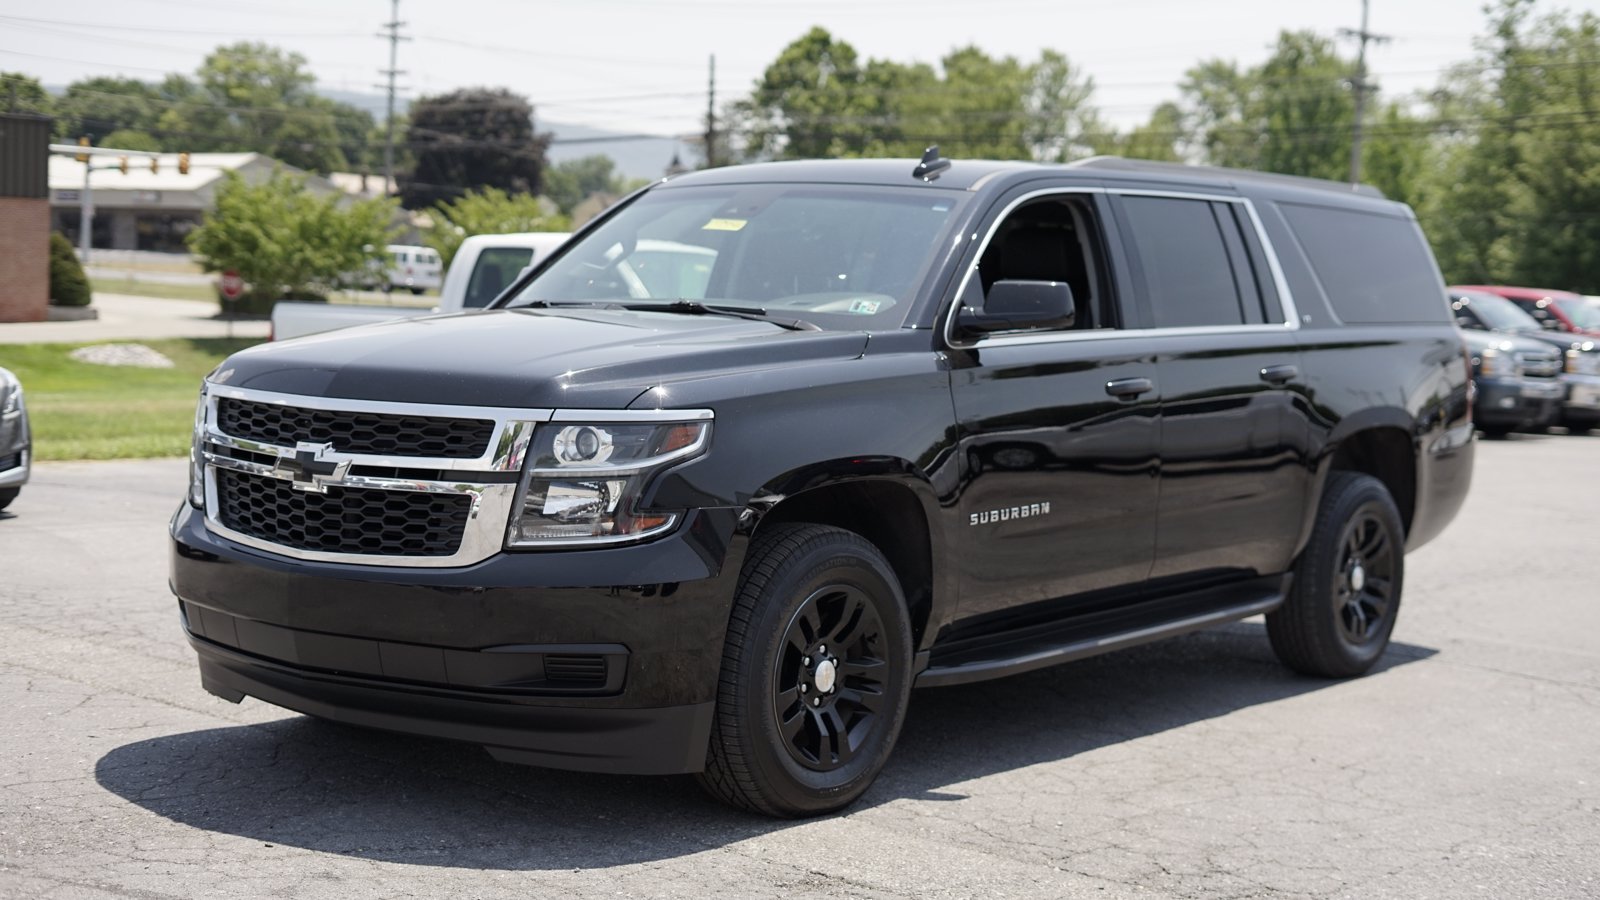 PreOwned 2018 Chevrolet Suburban LT 4WD